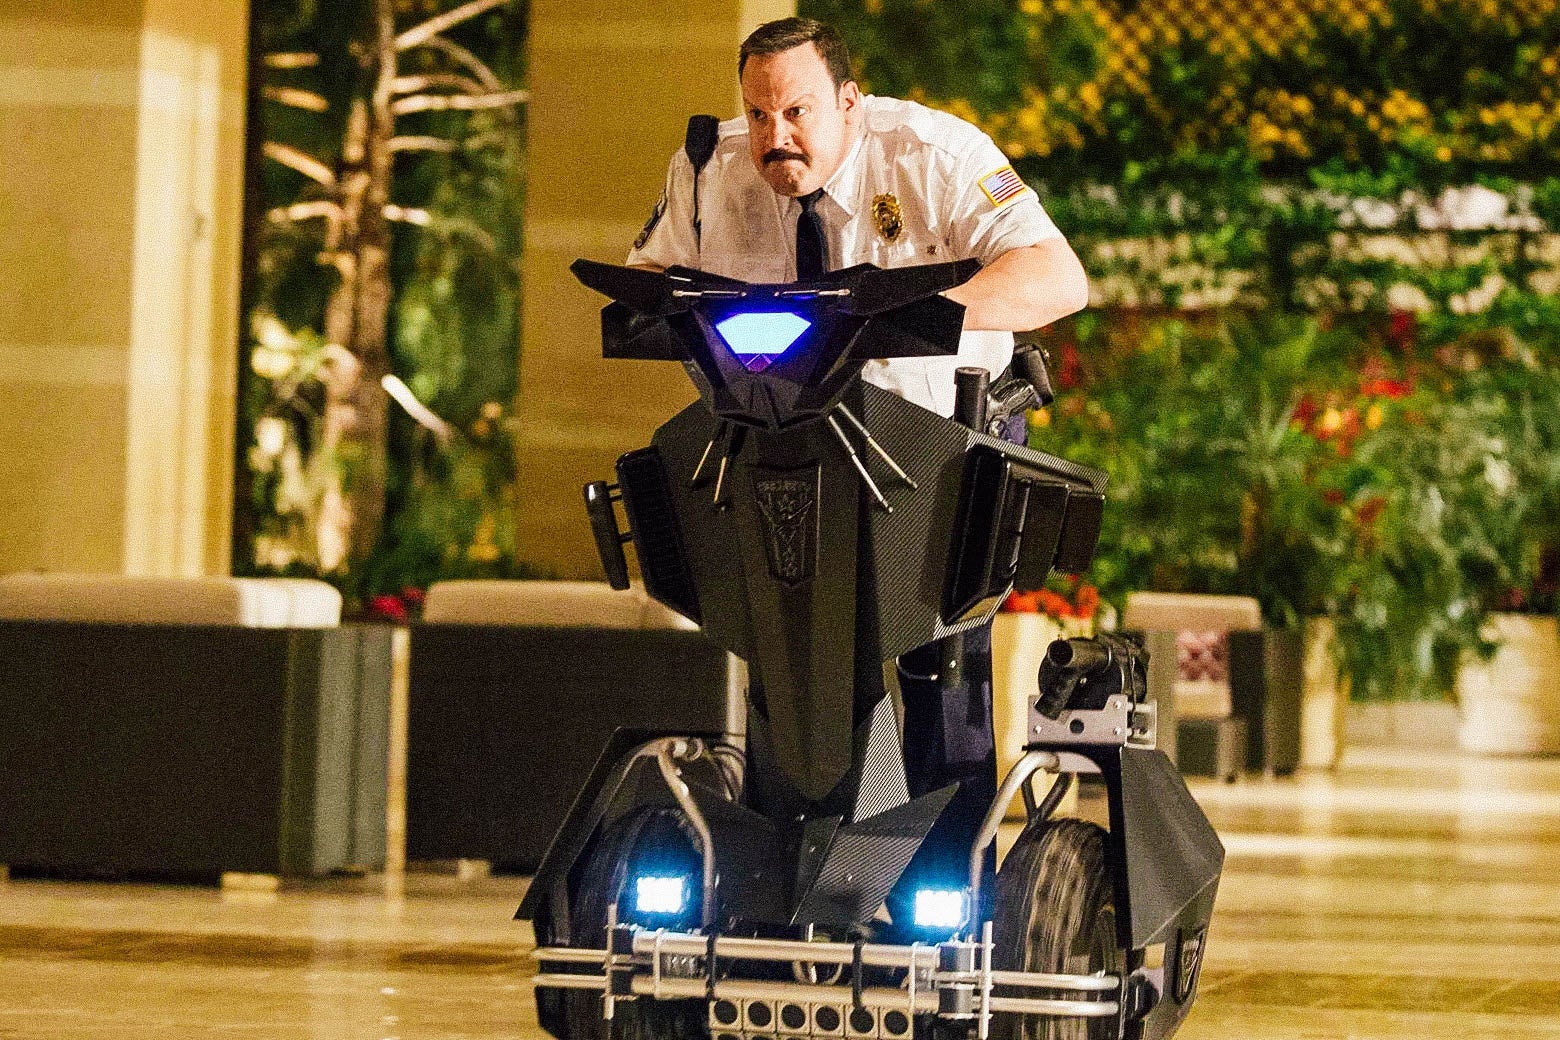 Kevin James leans forward on a Segway as he motors through the mall.